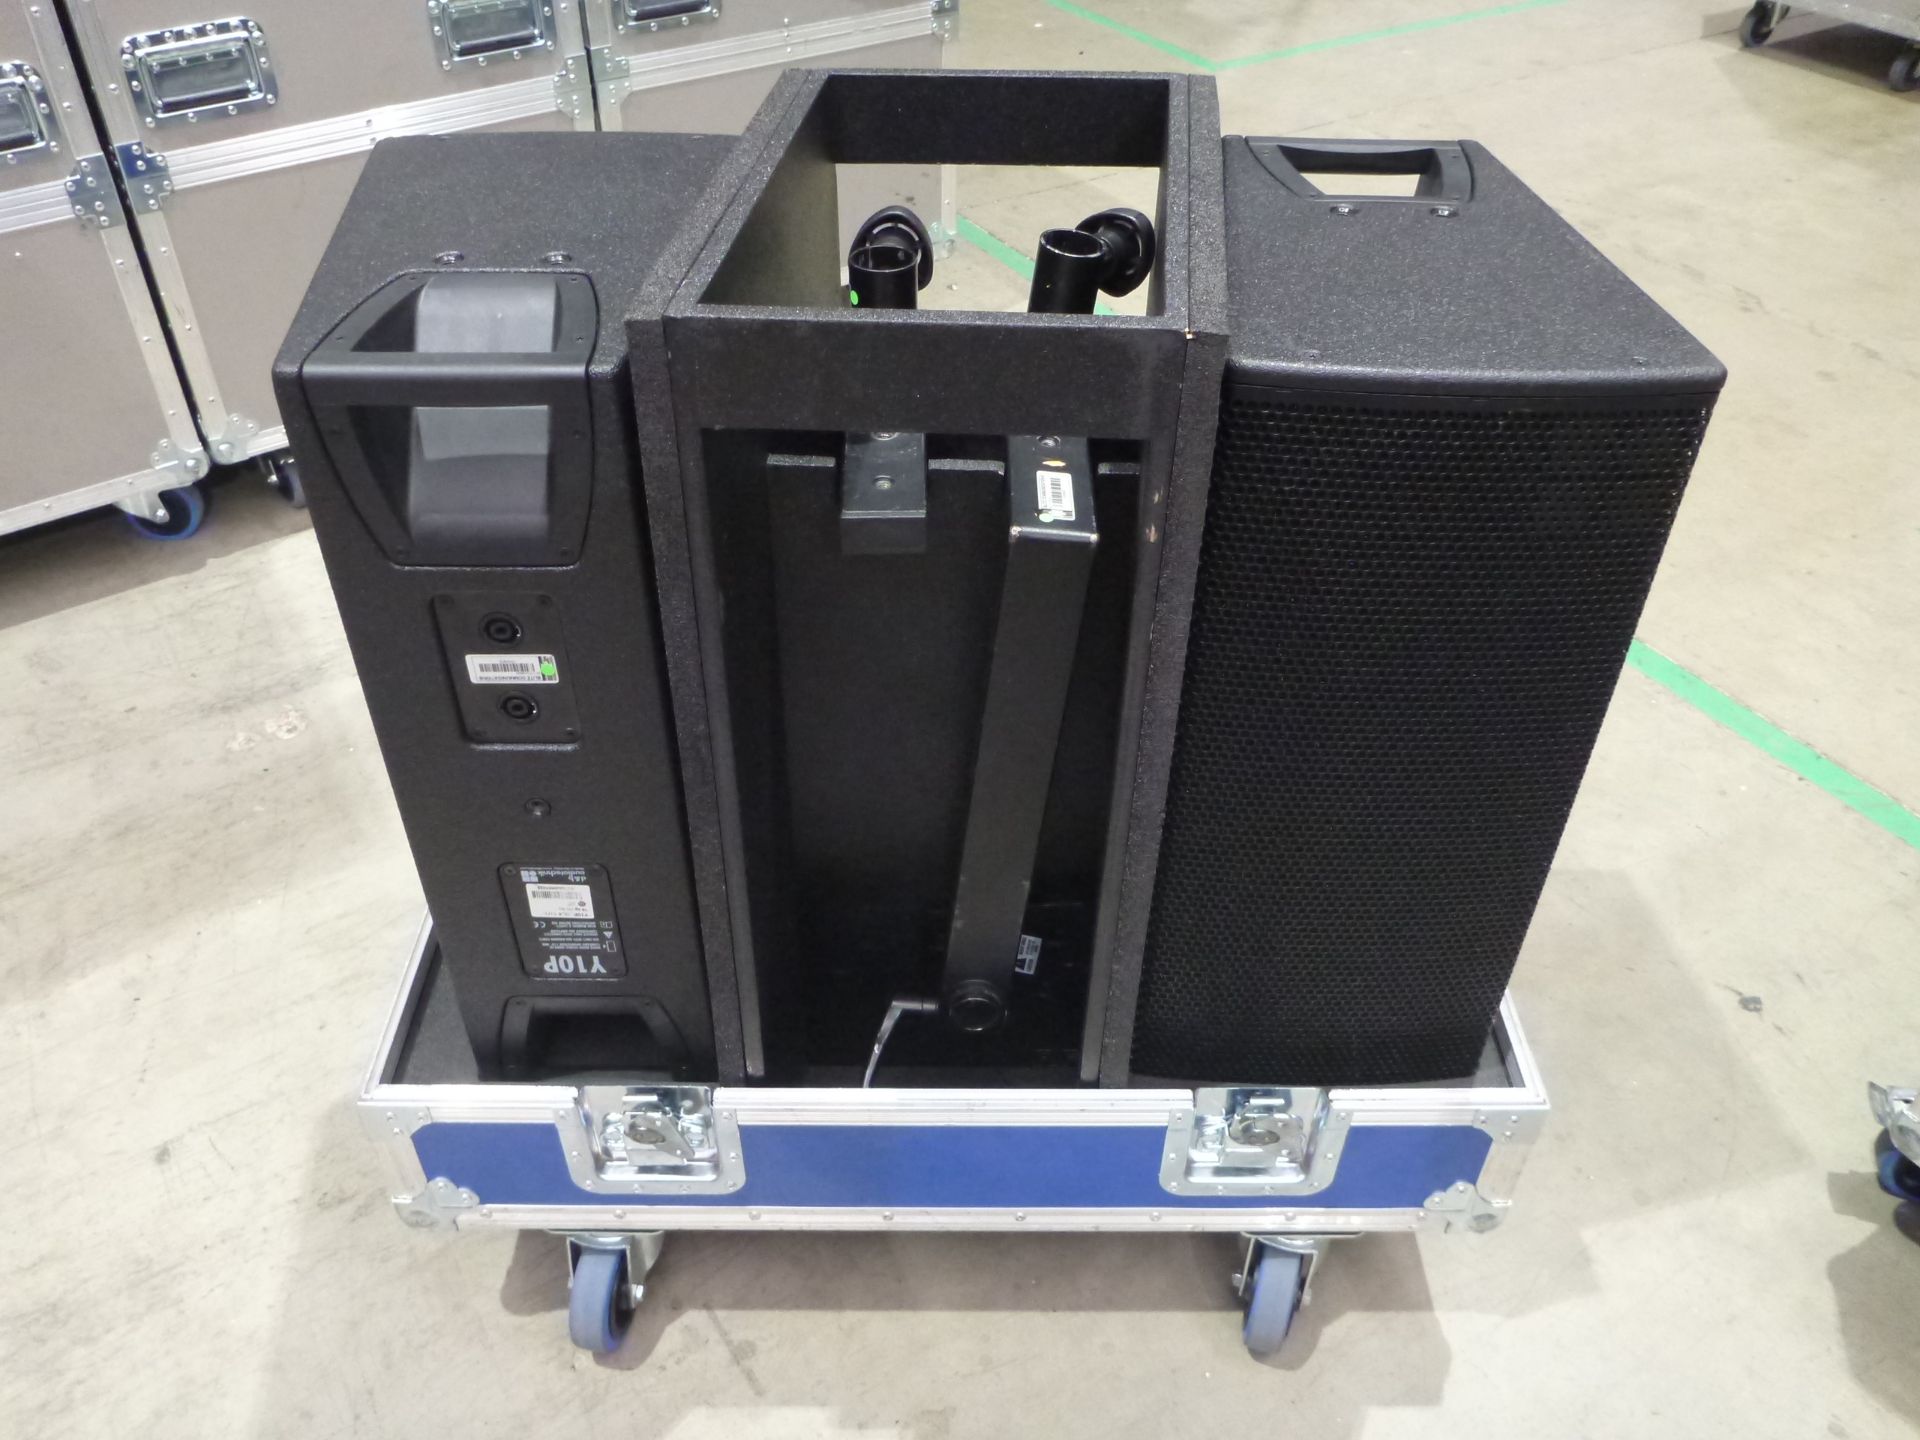 D & B Audiotecknik Y10P Loudspeakers (Pair) In flight case with flying frame, top hat and safety